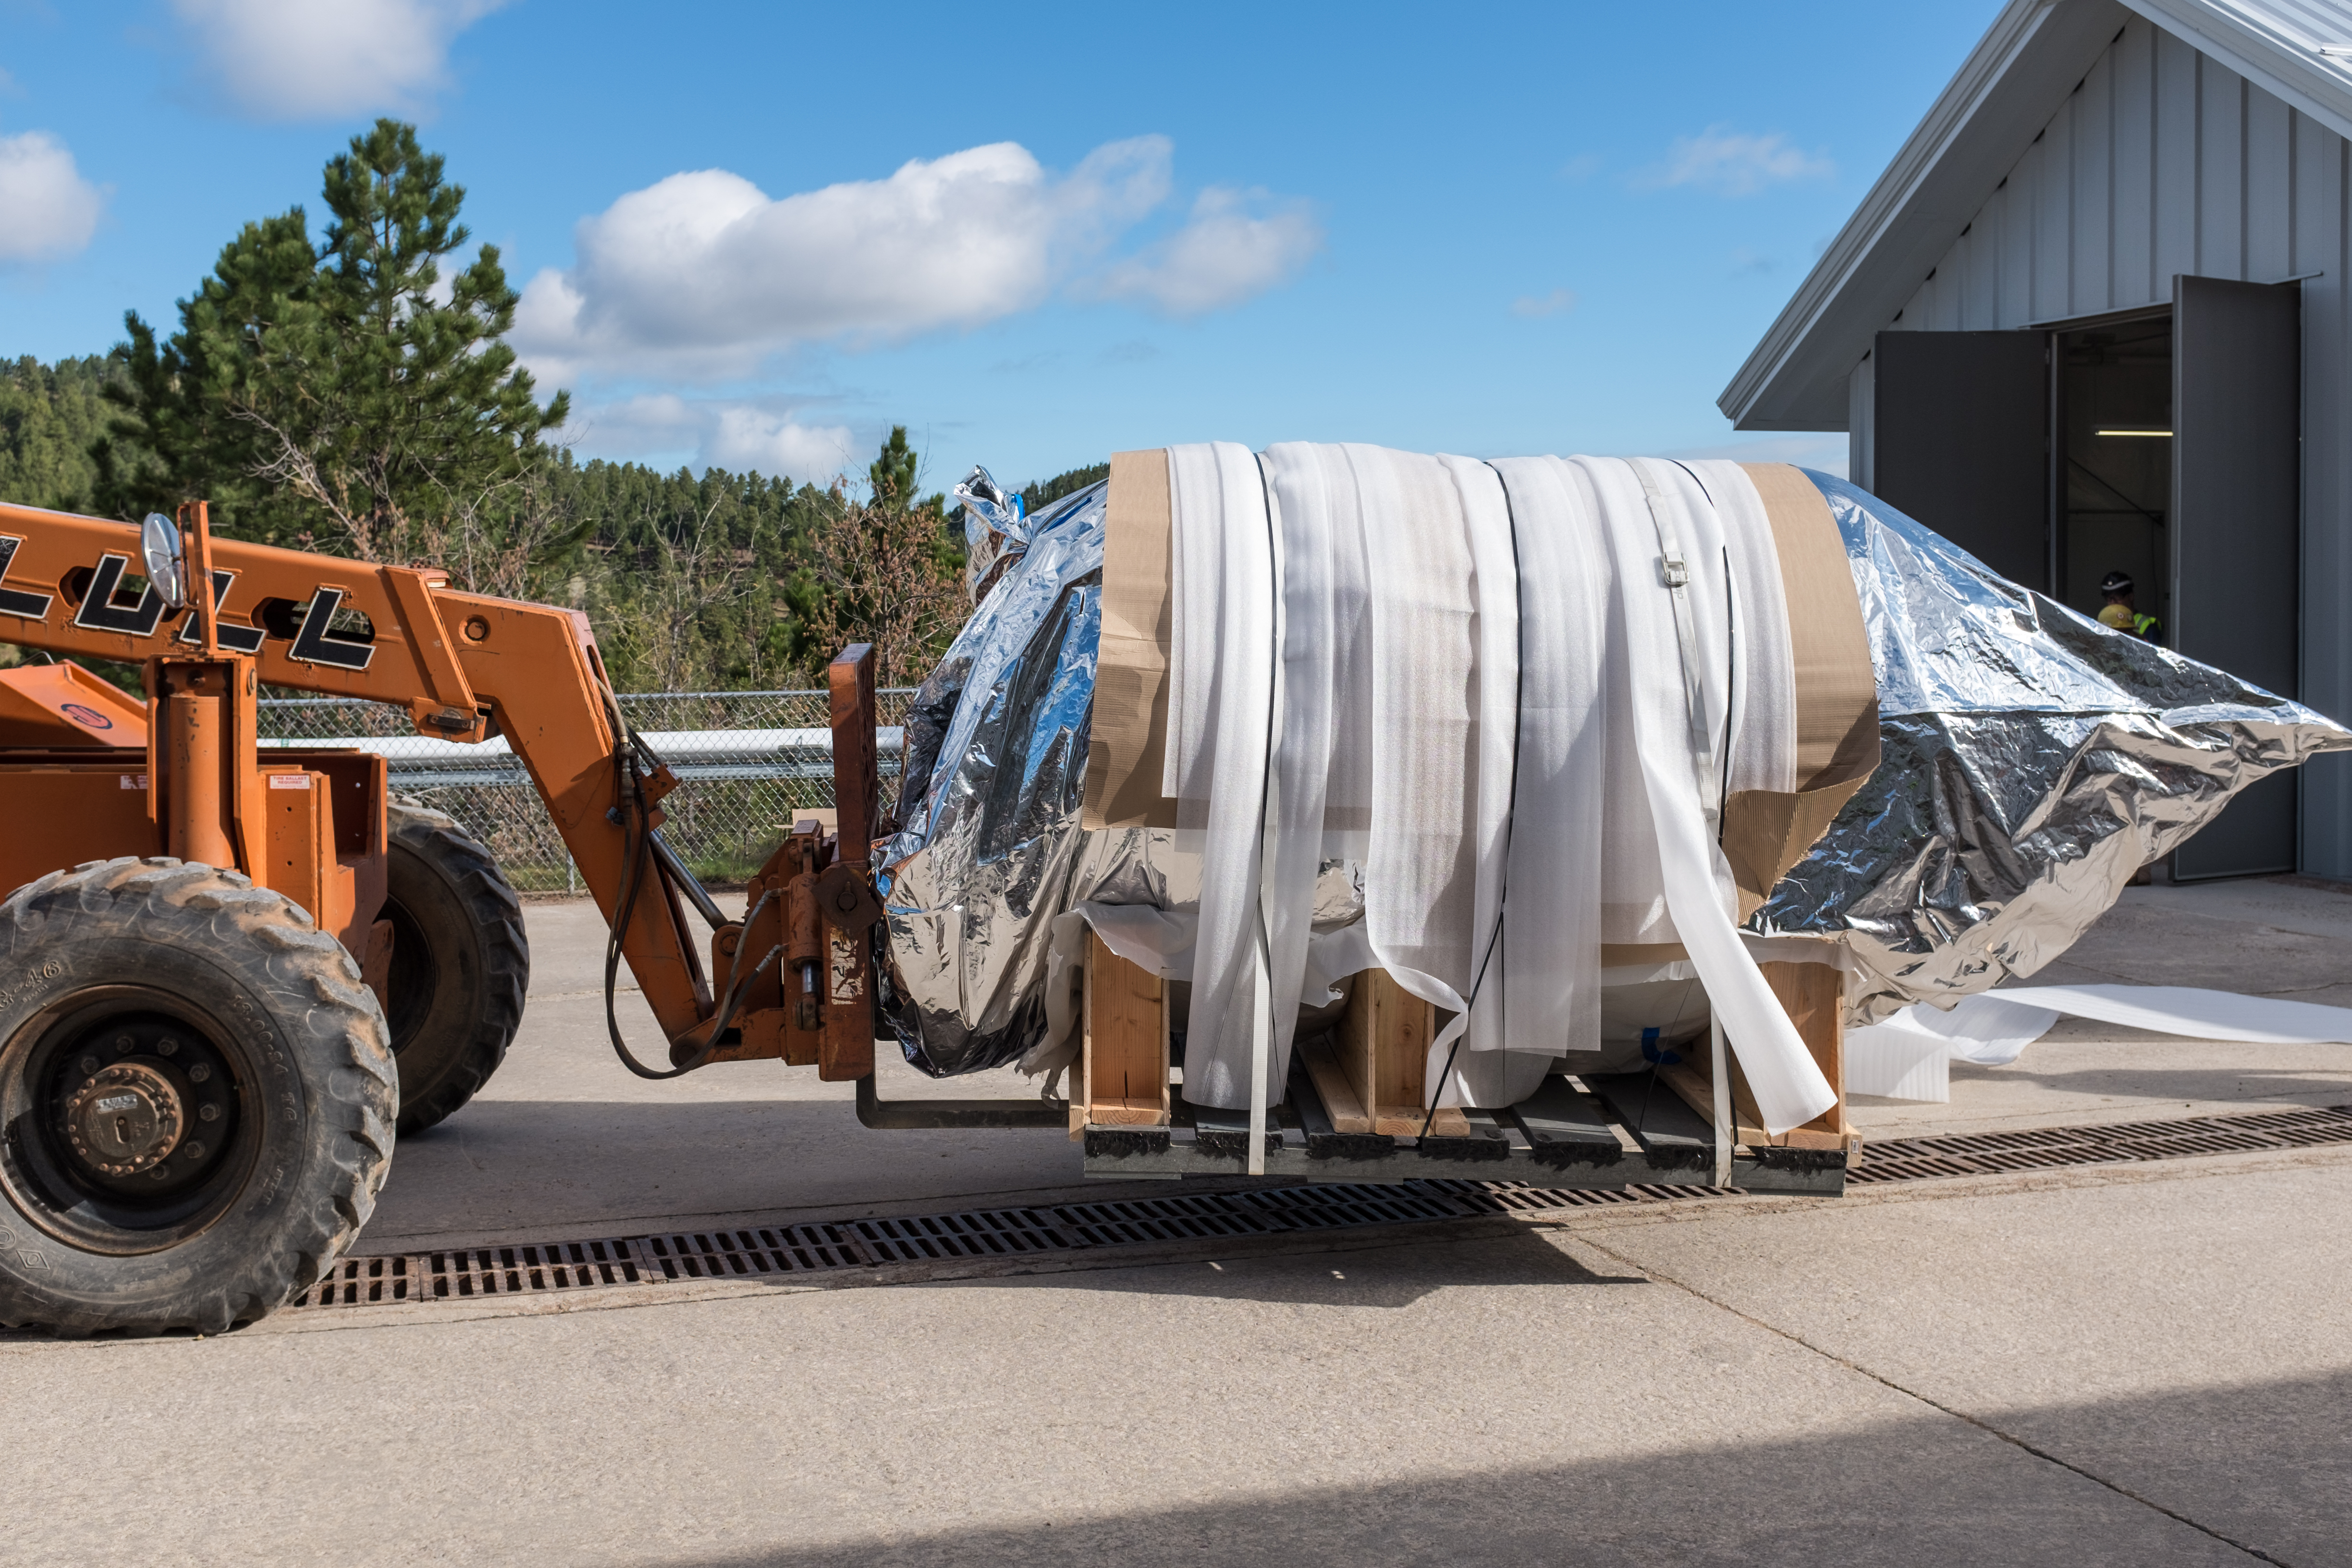 Photo - The inner cryostat vessel is off-loaded from a truck at the Sanford Underground Research Facility in South Dakota. (Credit: STFC)